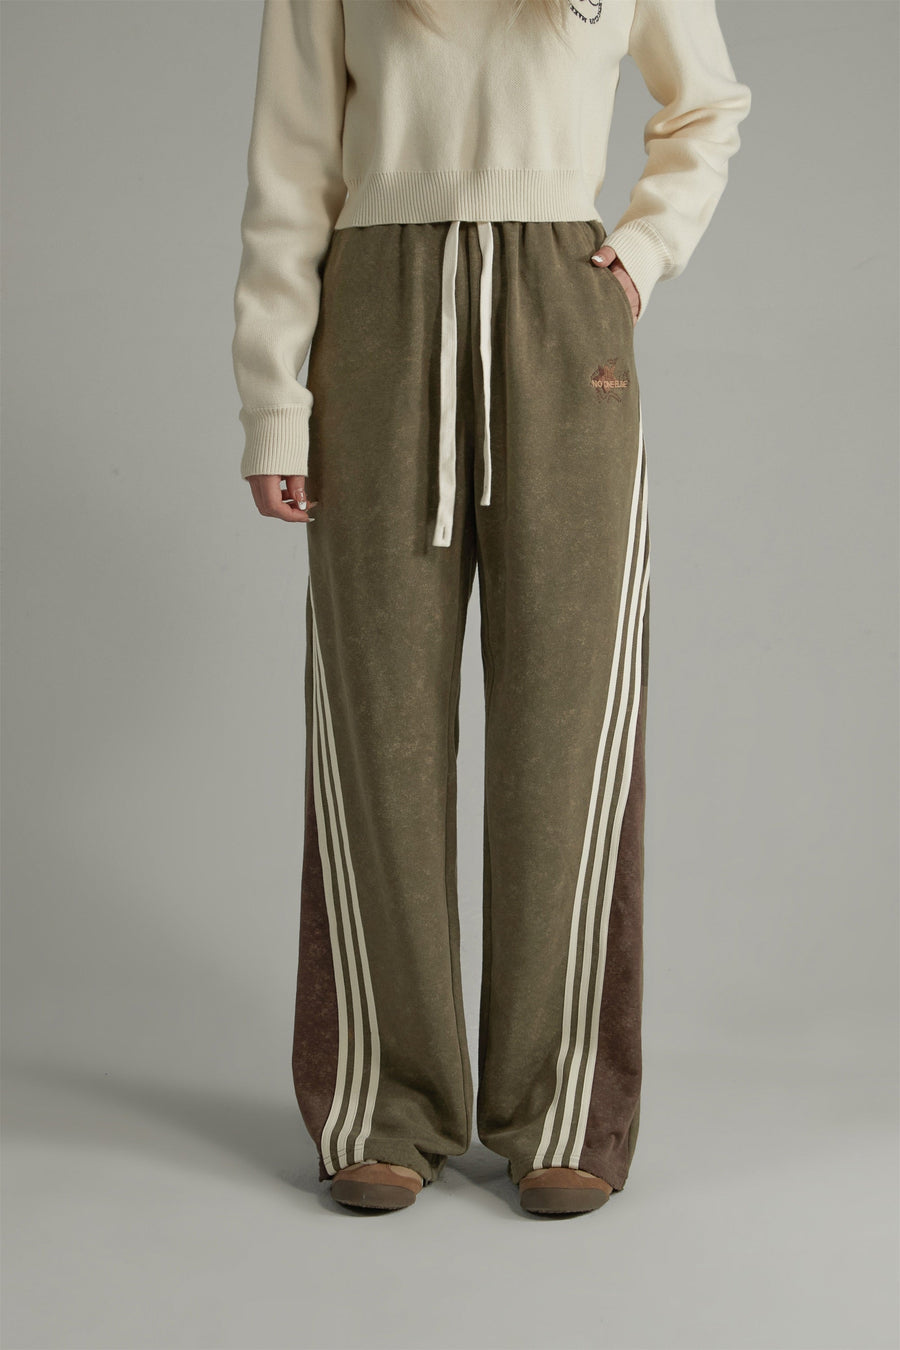 CHUU Star Embroidered Wide Casual Pants